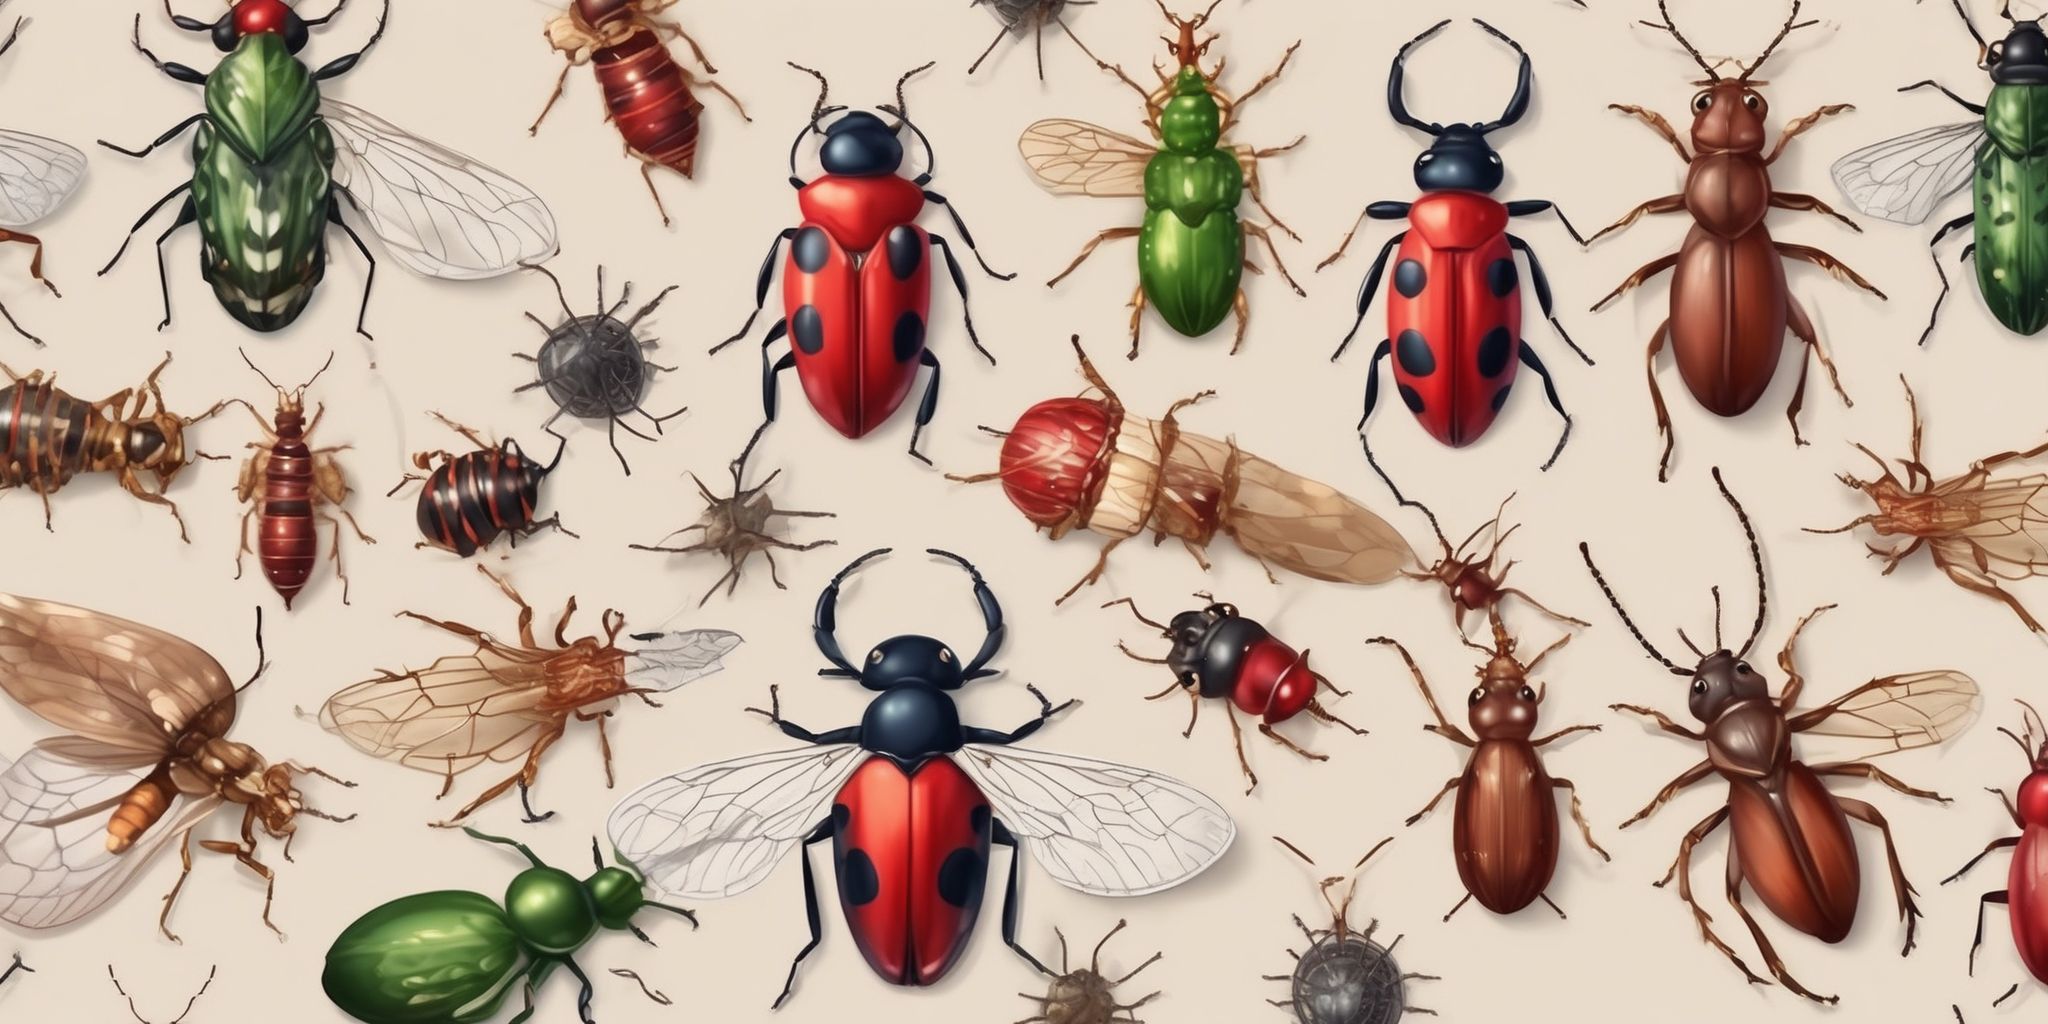 Insects in realistic Christmas style